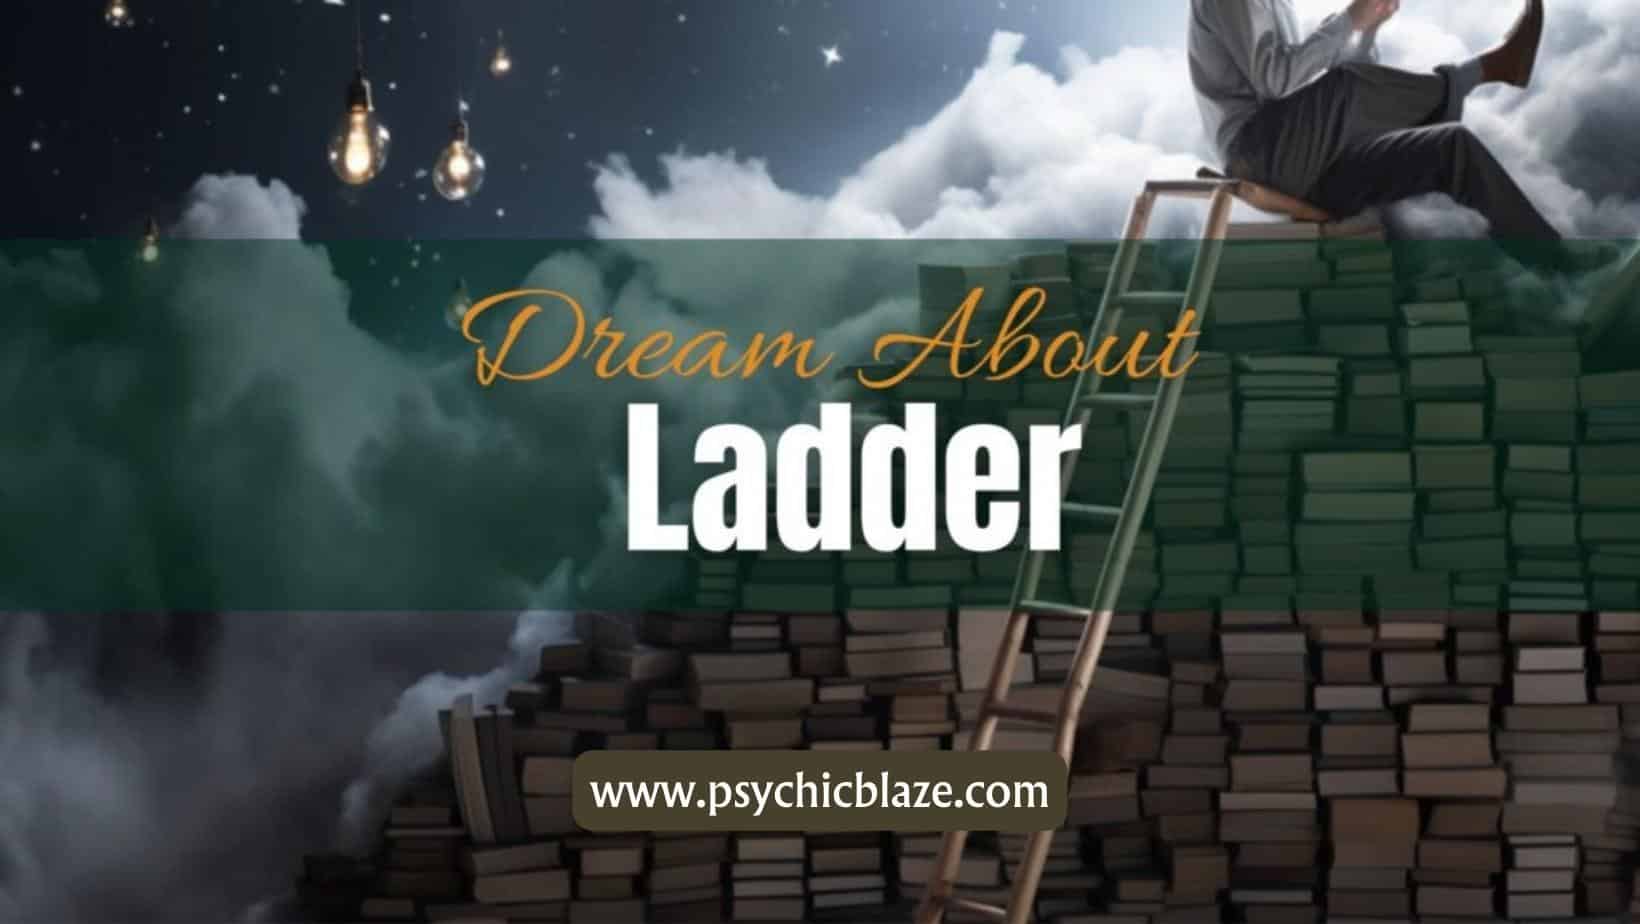 Dream about Ladders